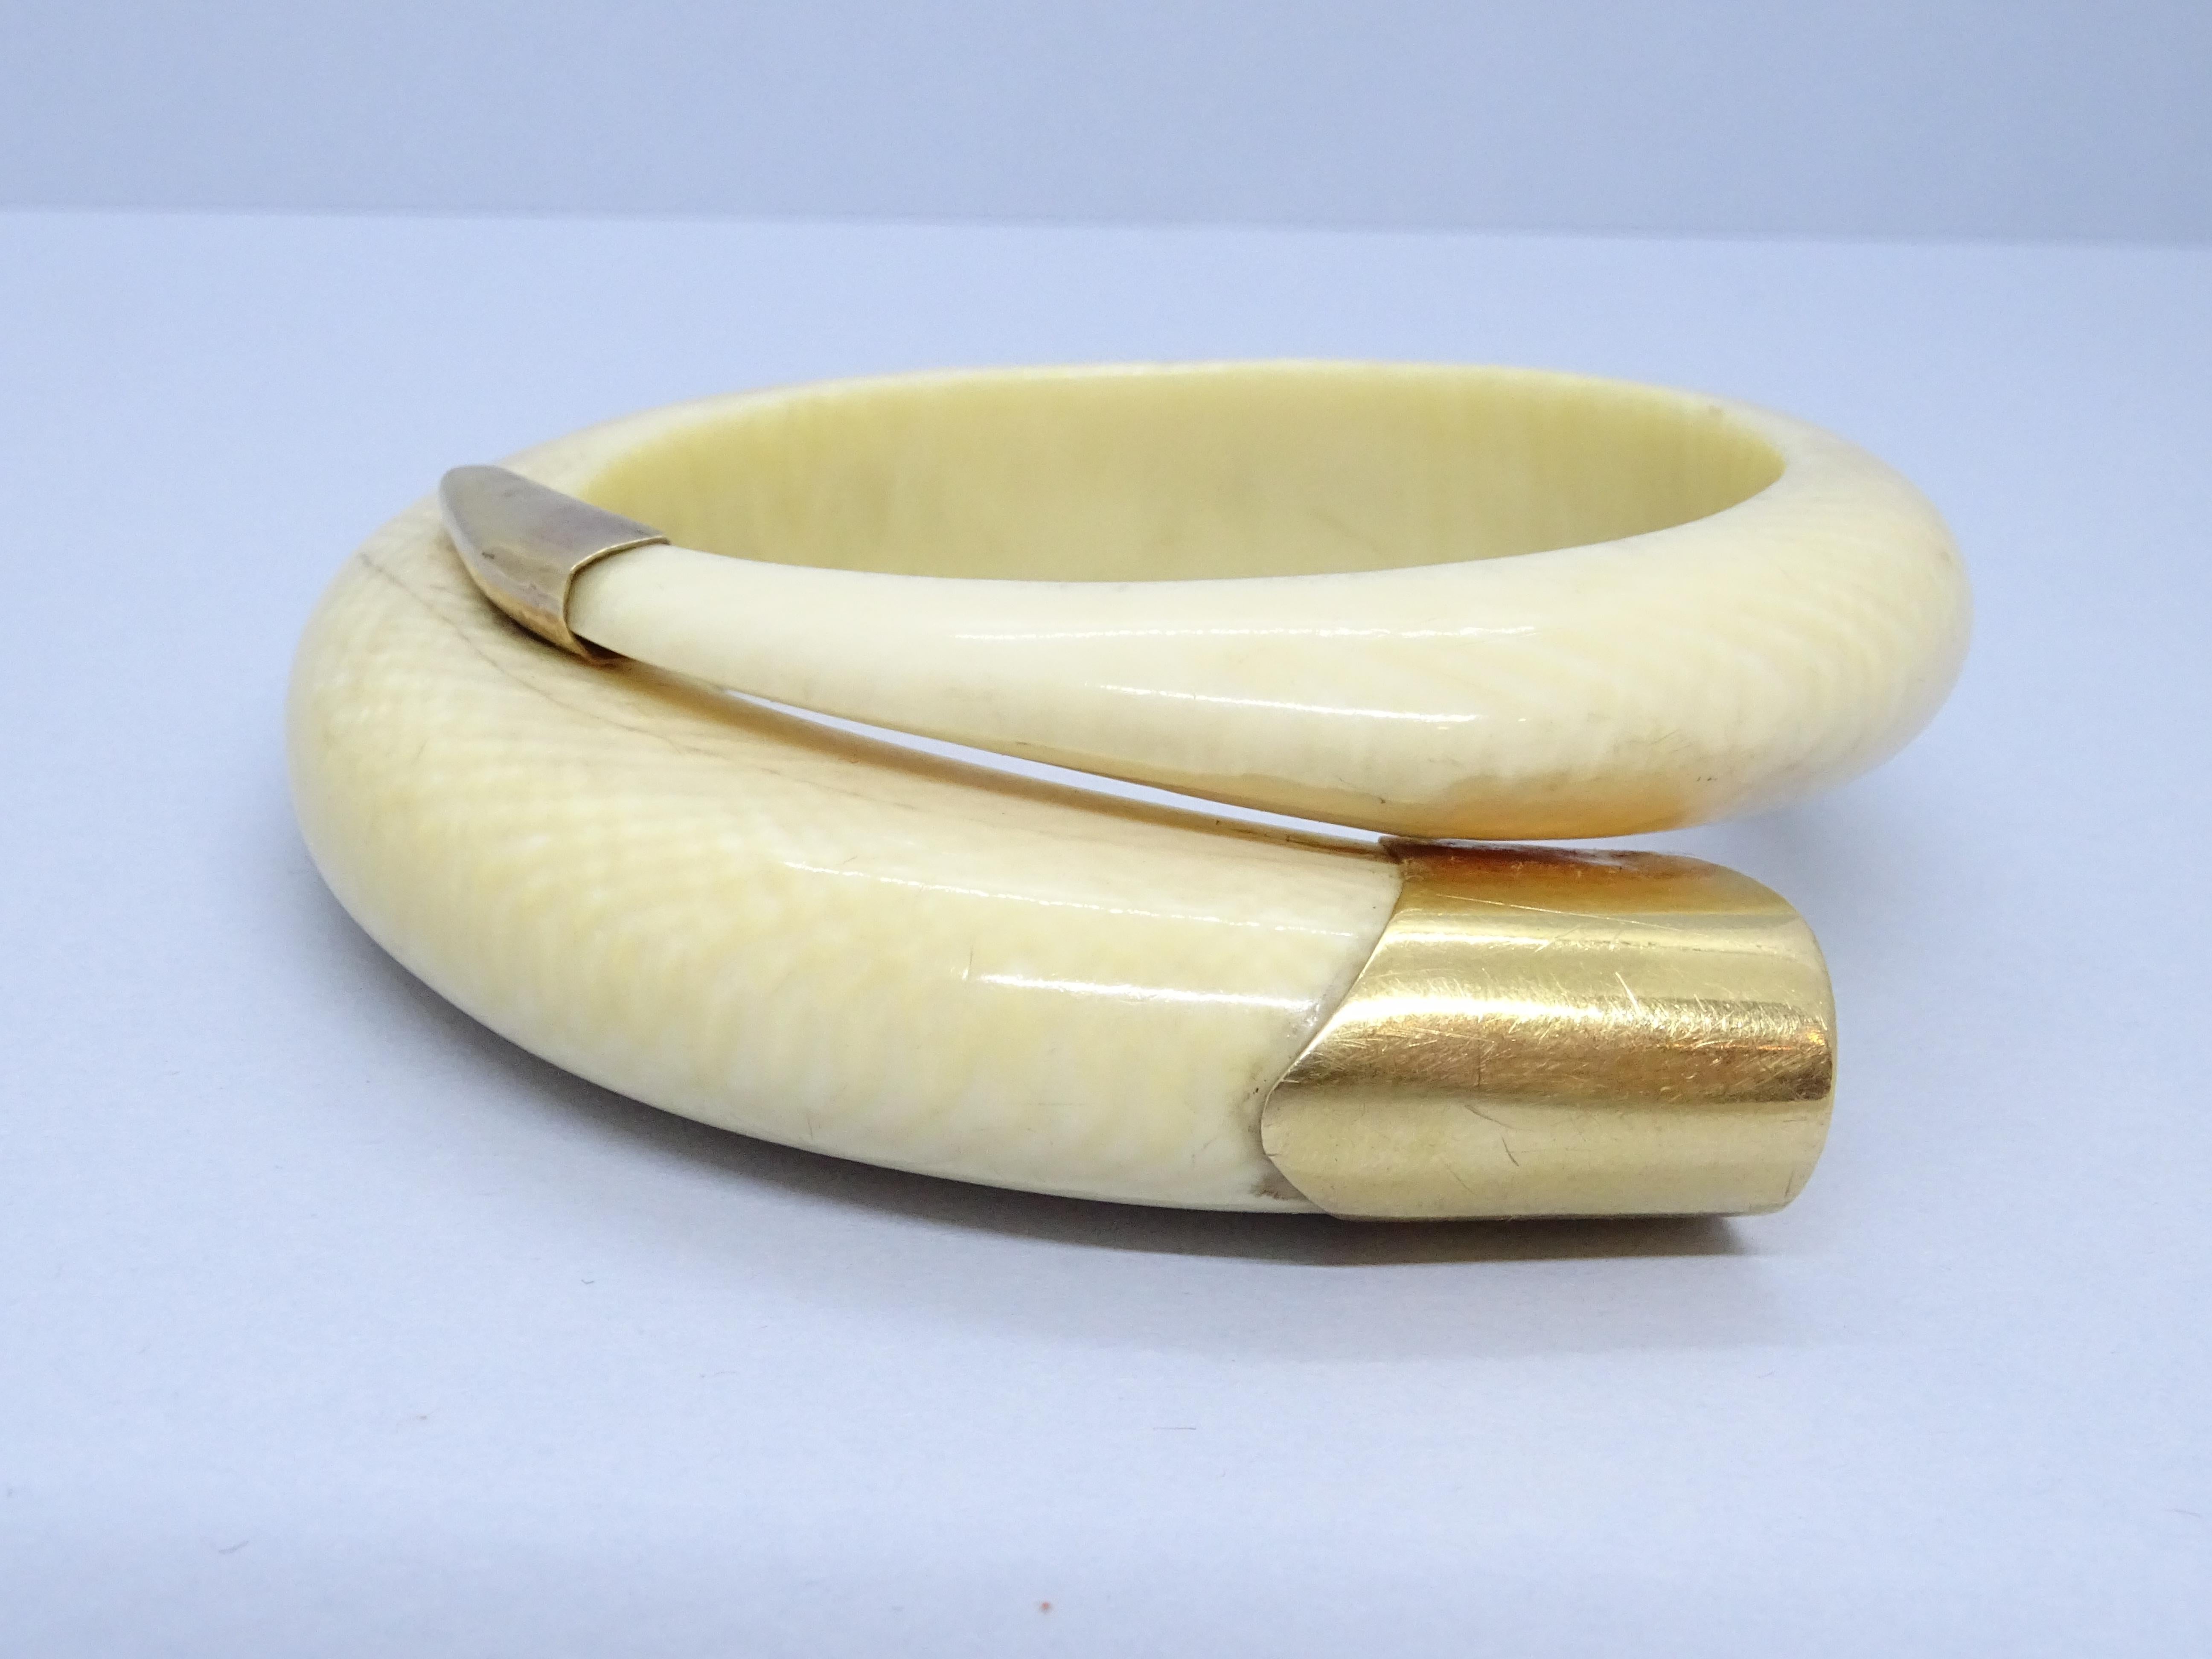 Exquisite and one of a kind  ivory bracelet or bracelet, decorated with gold finishes. This original bracelet very refined and elegant at the same time has a beautiful  decreasing serpentine shape demonstrates great precision when working with